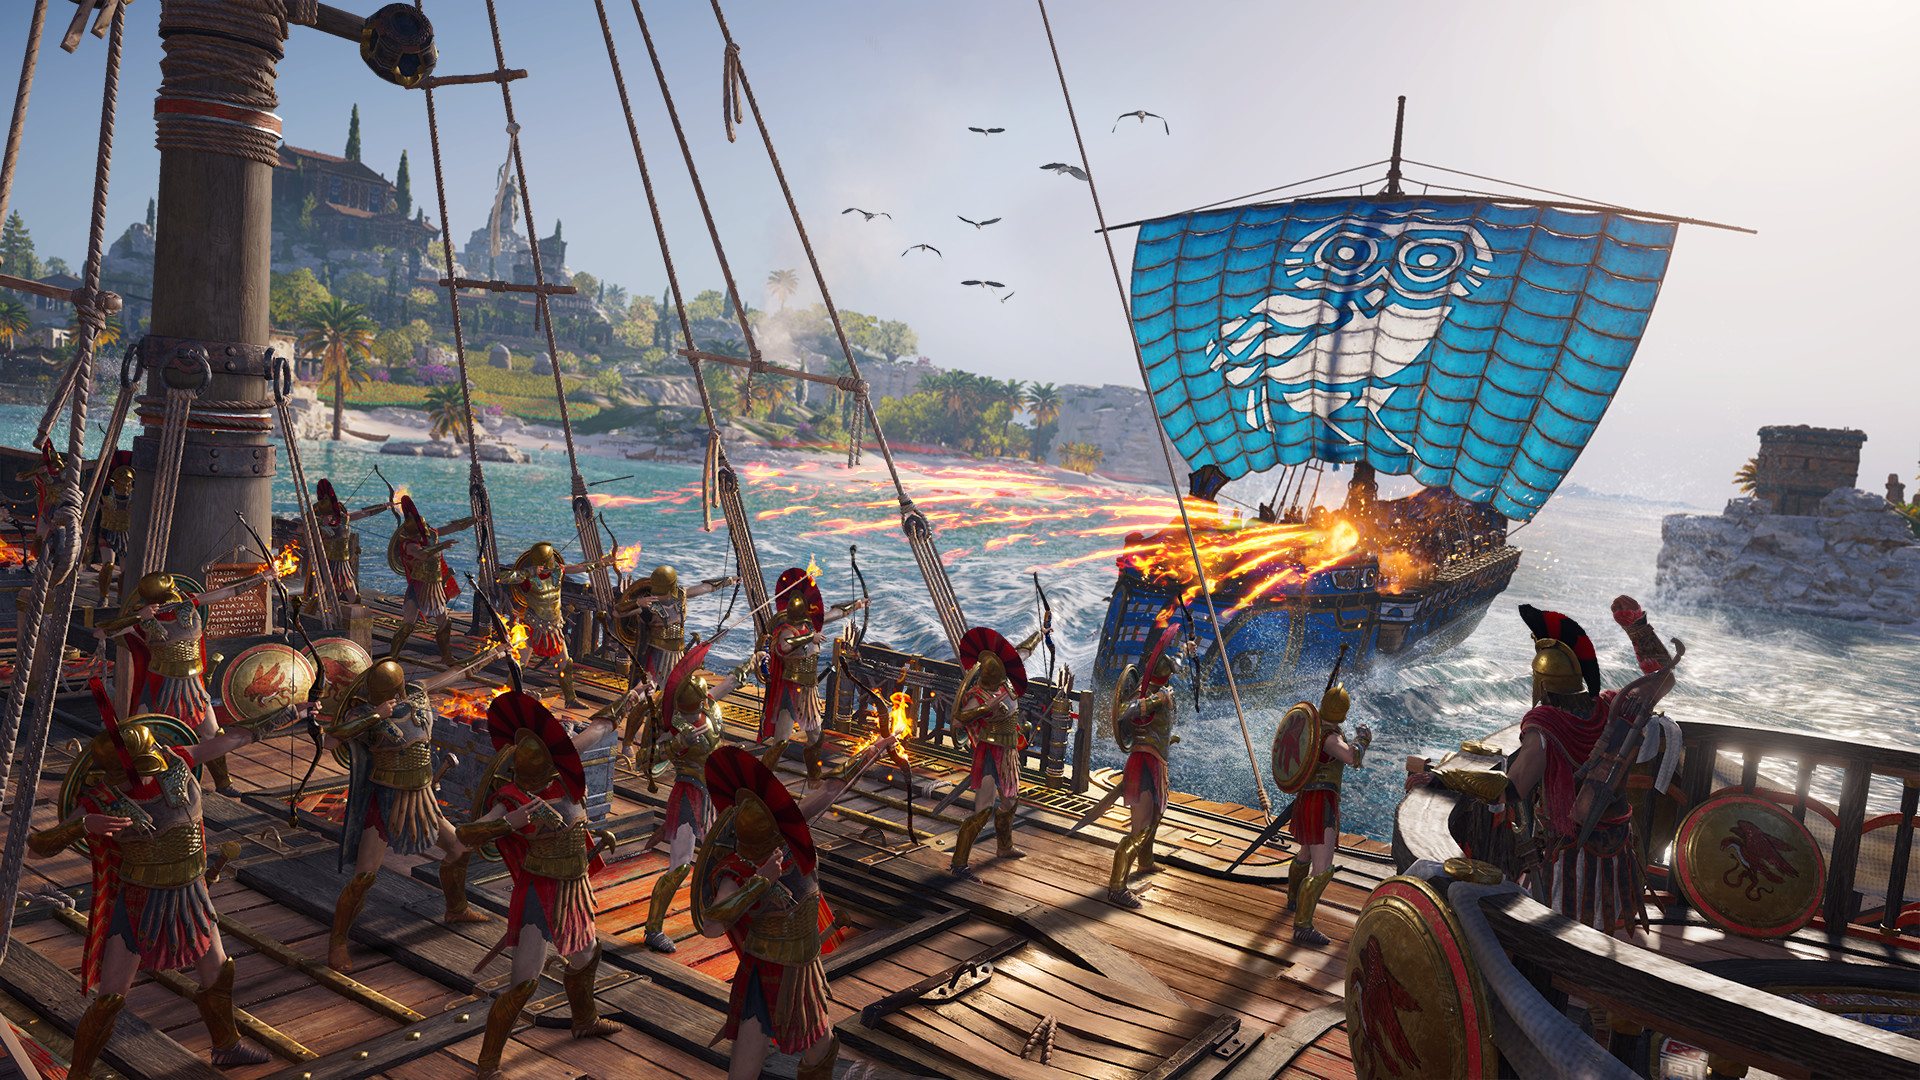 Assassin's Creed Odyssey Ultimate Edition Steam Altergift